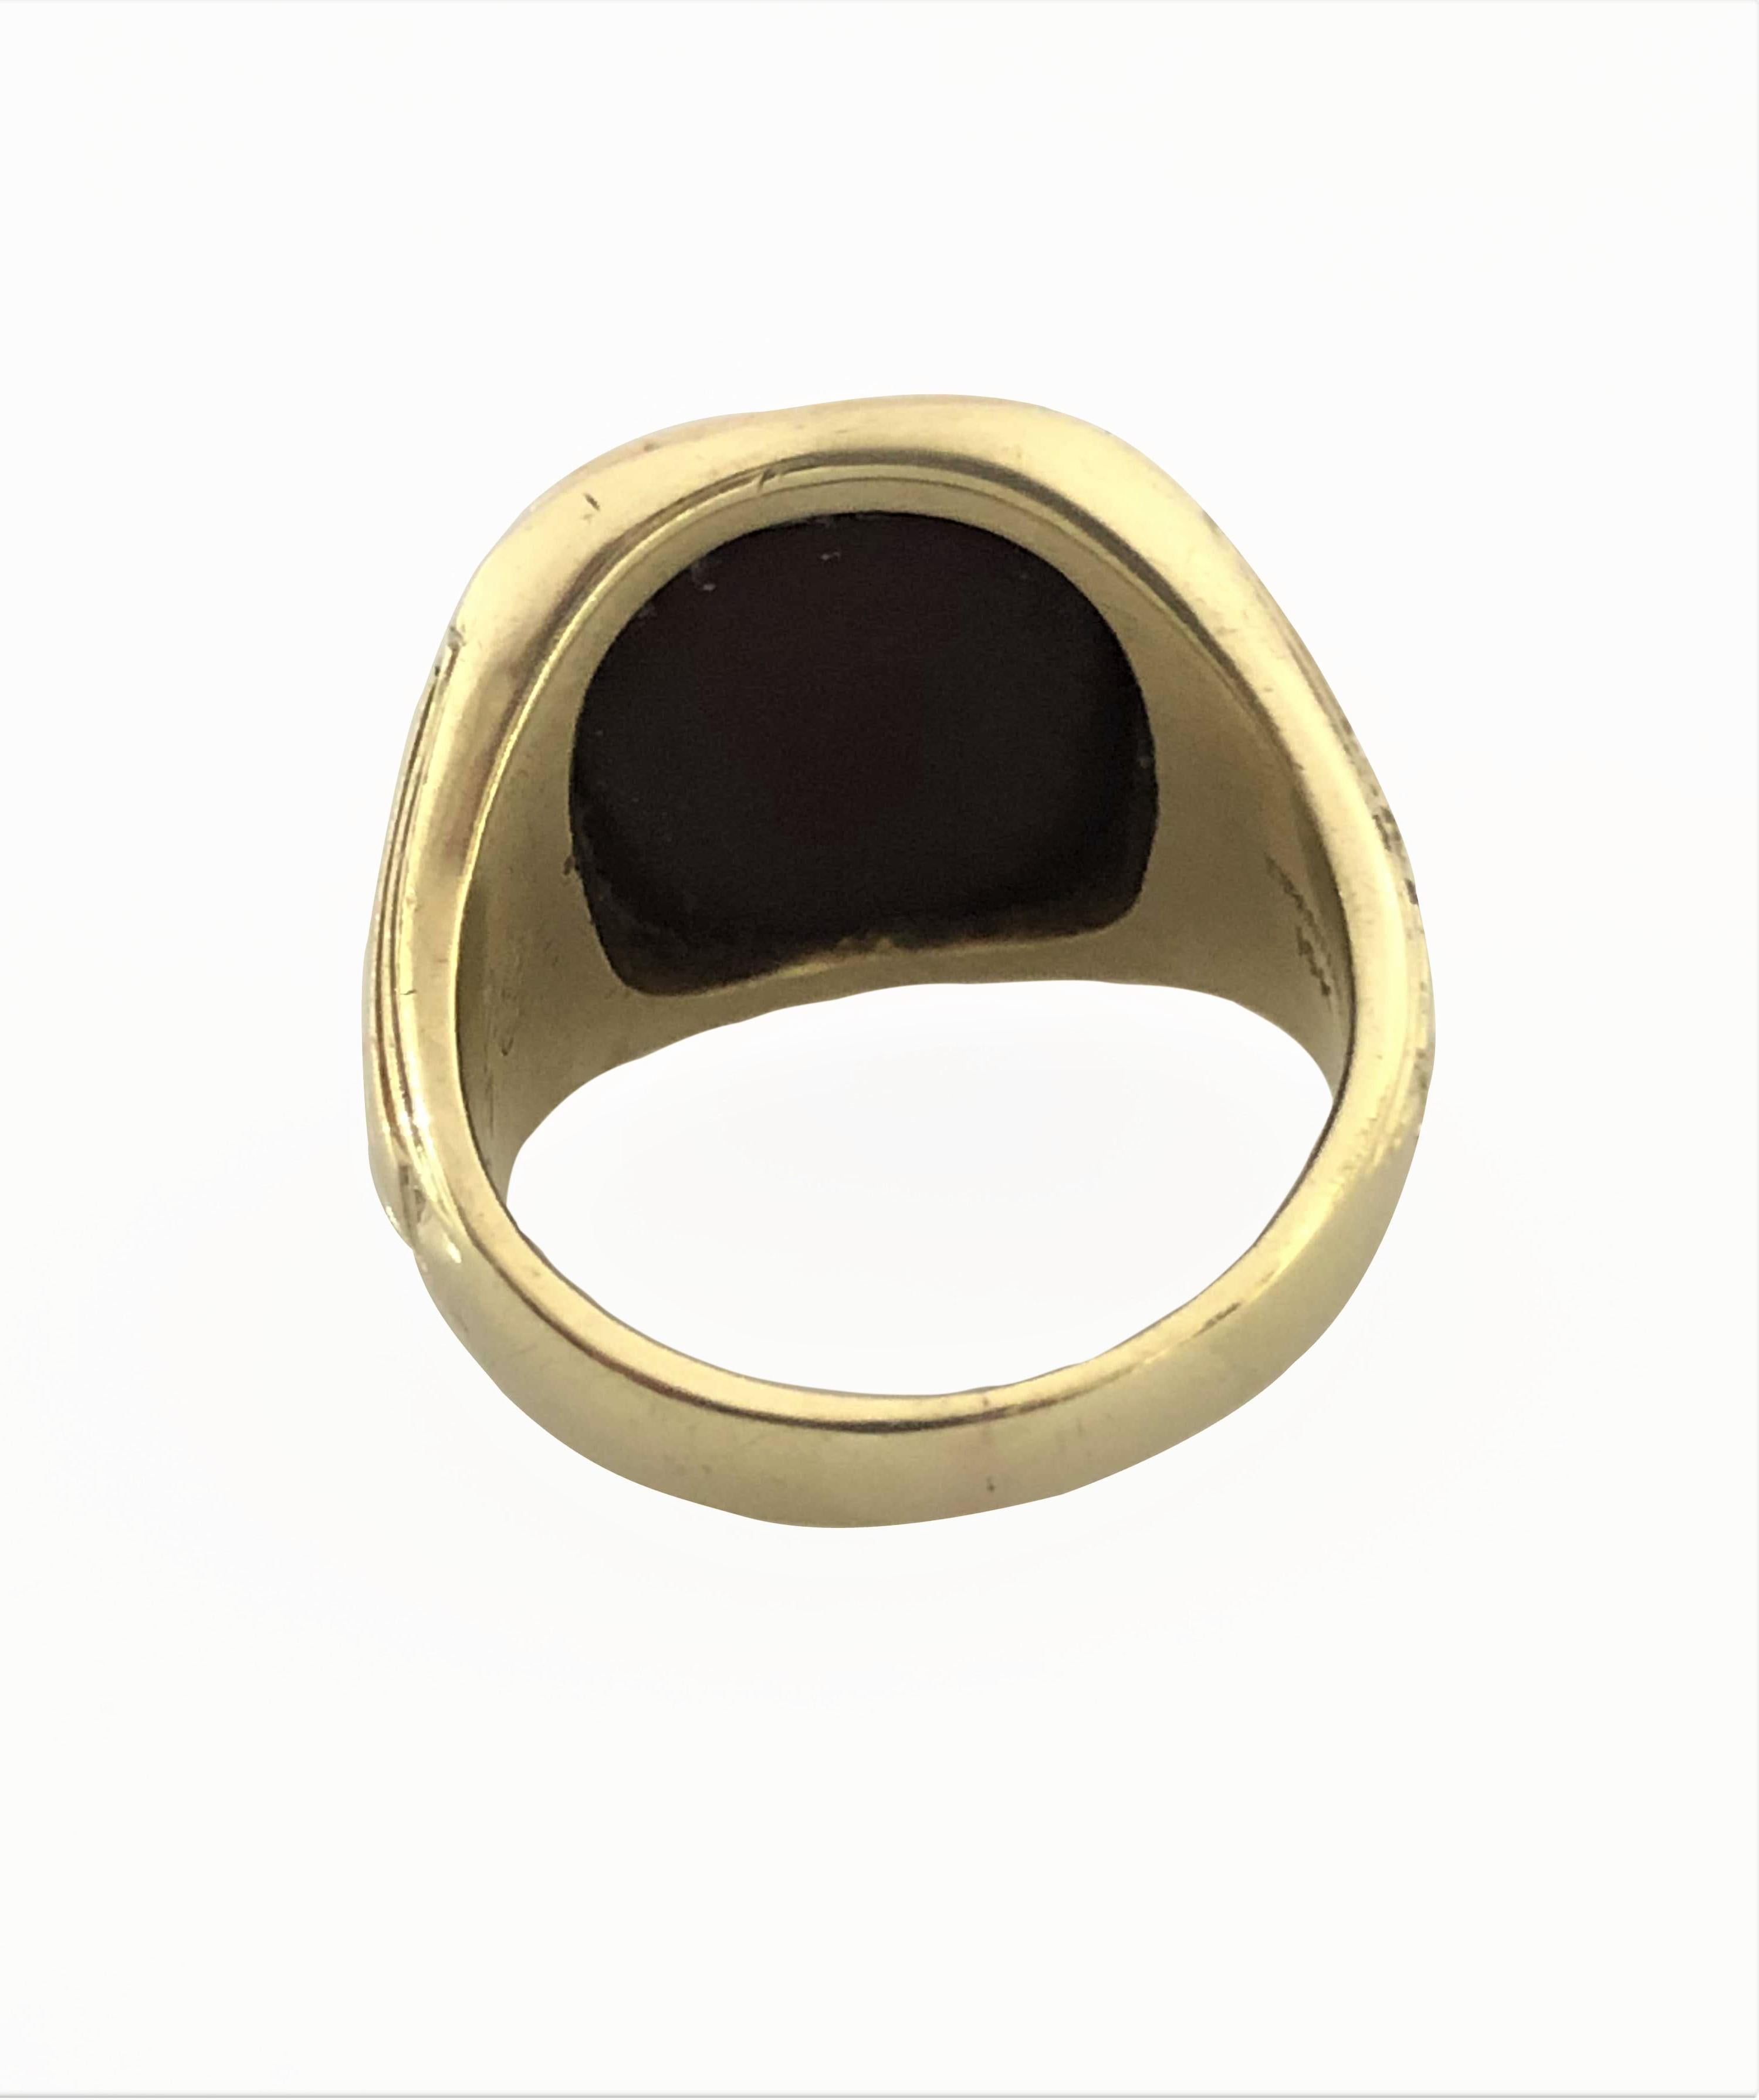 Circa 1910 Tiffany & Company  14k Yellow Gold Signet Ring, set with a dark Red-Brown Carnelian that is engraved with a Greek alphabet Omega symbol. The top of the ring measures 5/8 x 5/8 inch. Deep engraving on either sides of the ring. Finger size